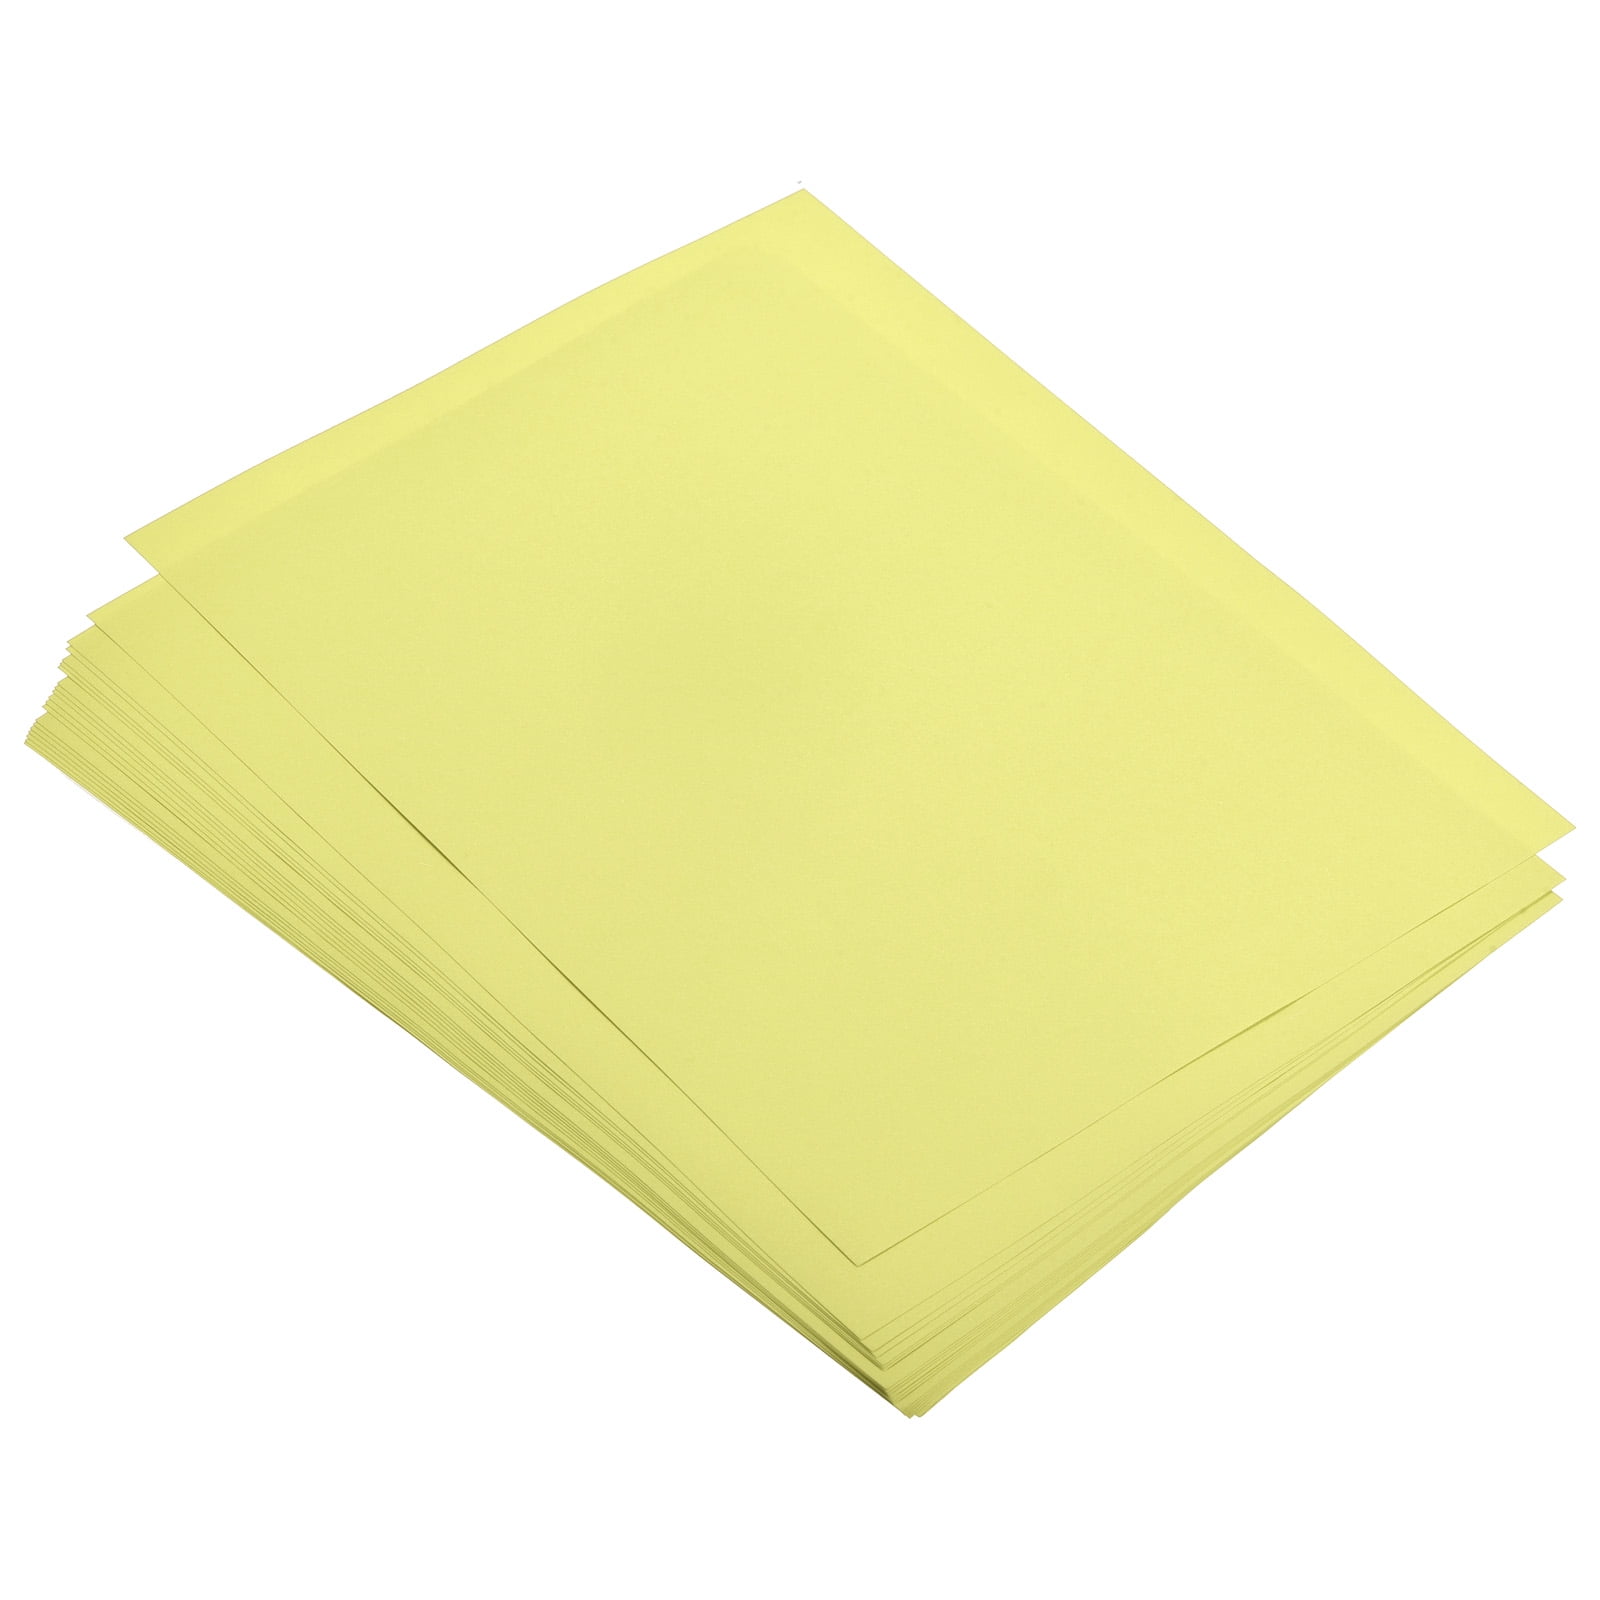 Light Yellow 11-x-17 BASIS Paper, 100 per package, 216 GSM (80lb Cover)